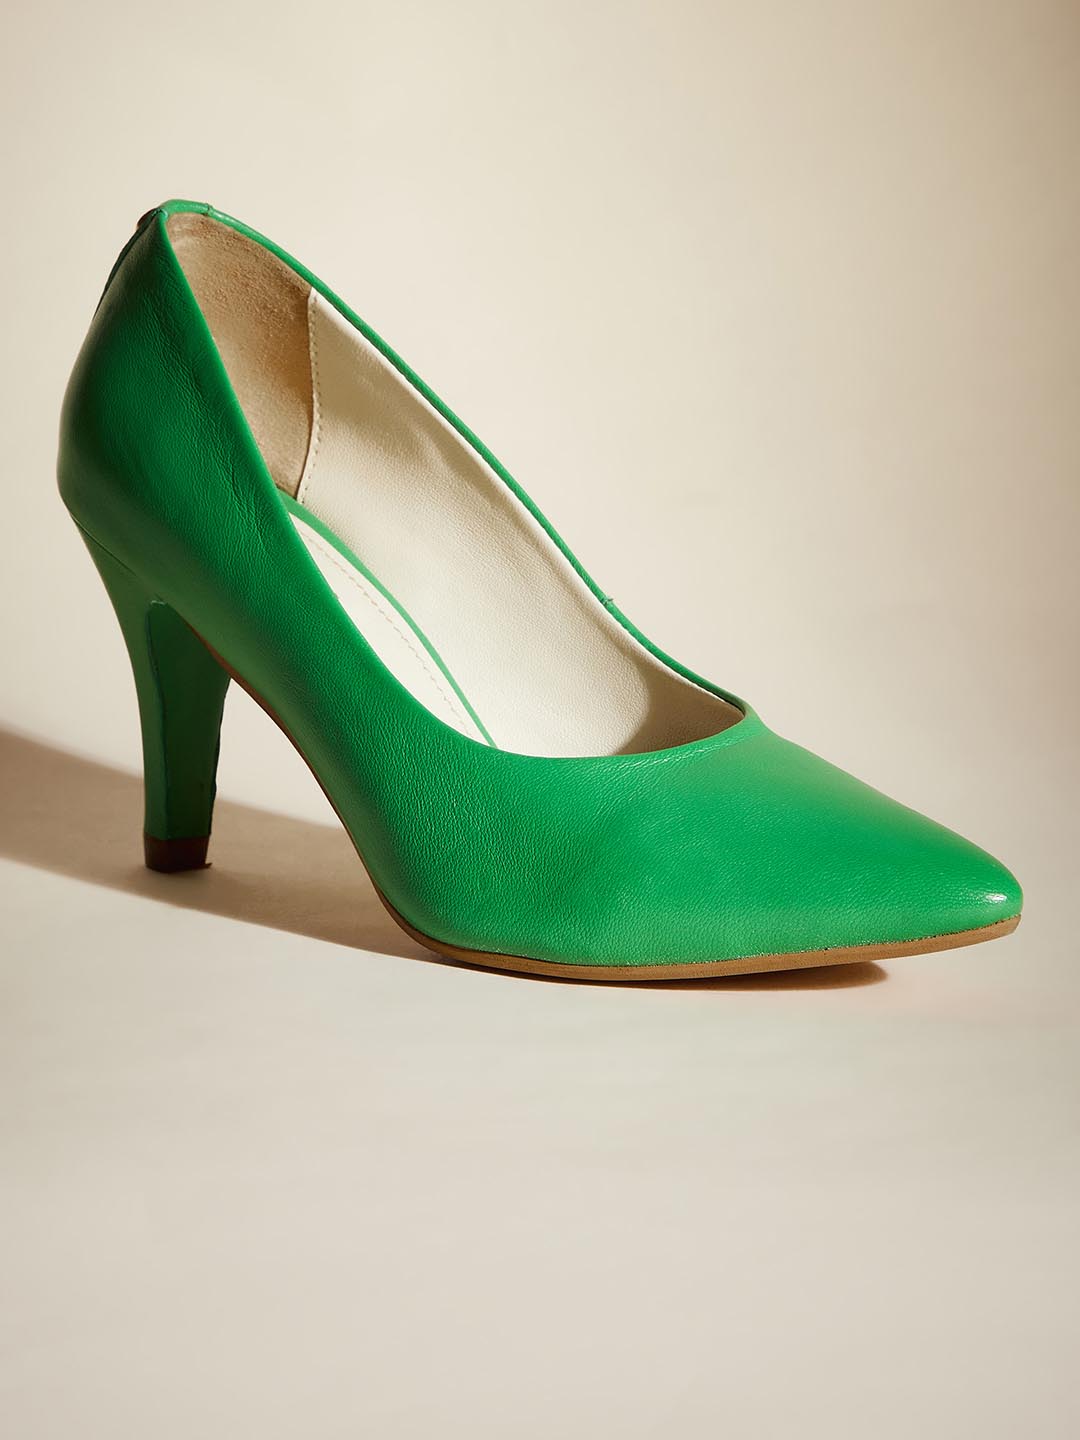 Buy See by Chloé Platforms online - Women - 7 products | FASHIOLA.in